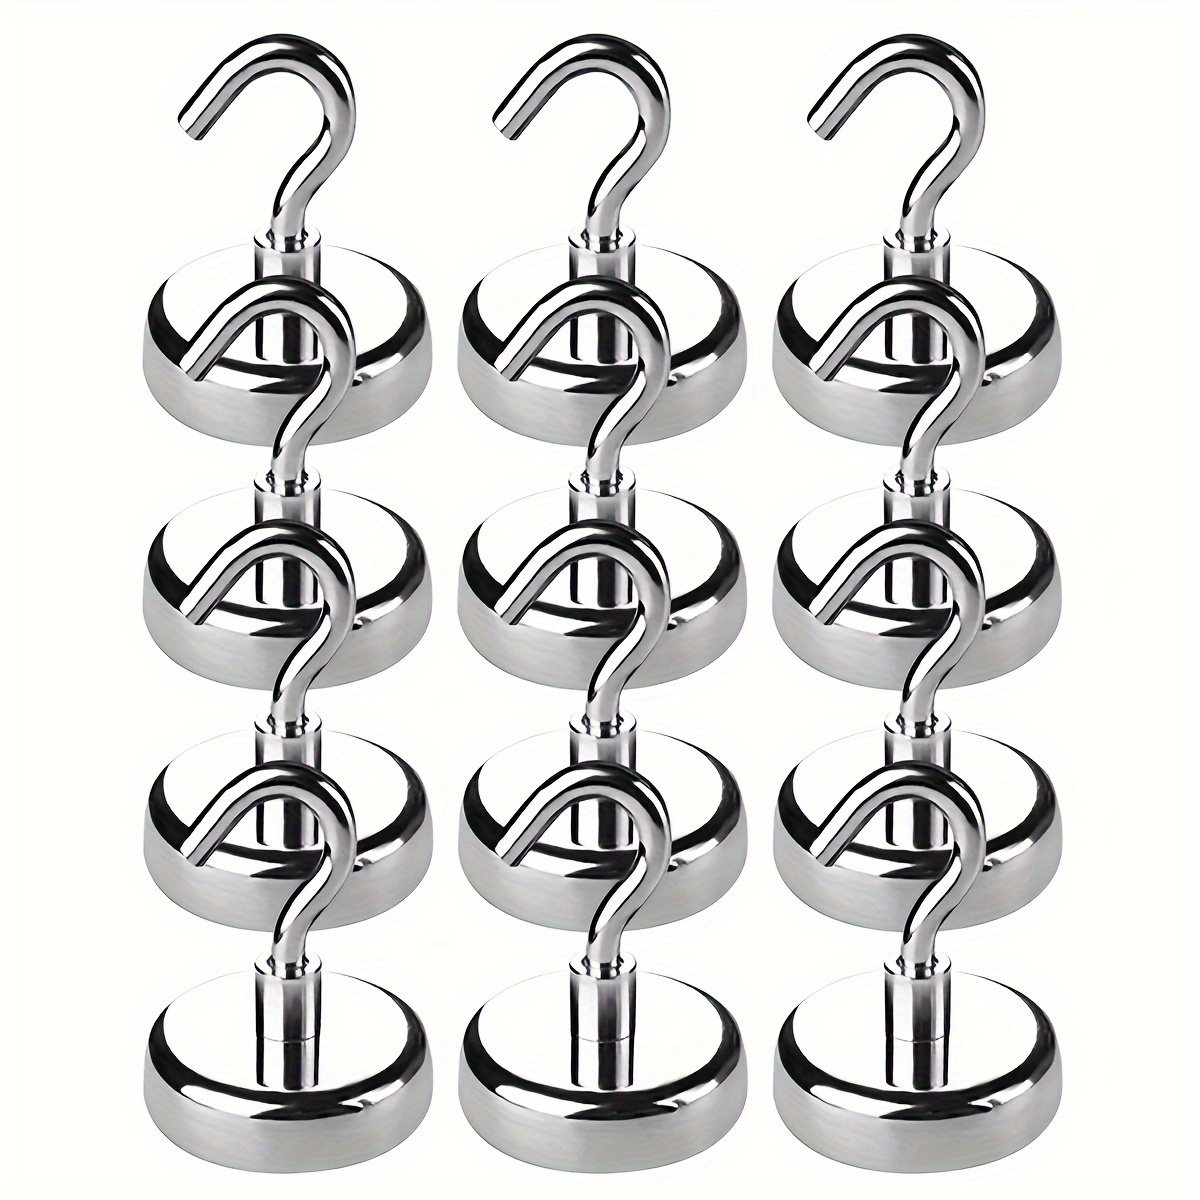 10pcs Stainless Steel Magnetic Wall Hooks Heavy Duty Hooks For Hanging,  Punch-free Magnet Hook